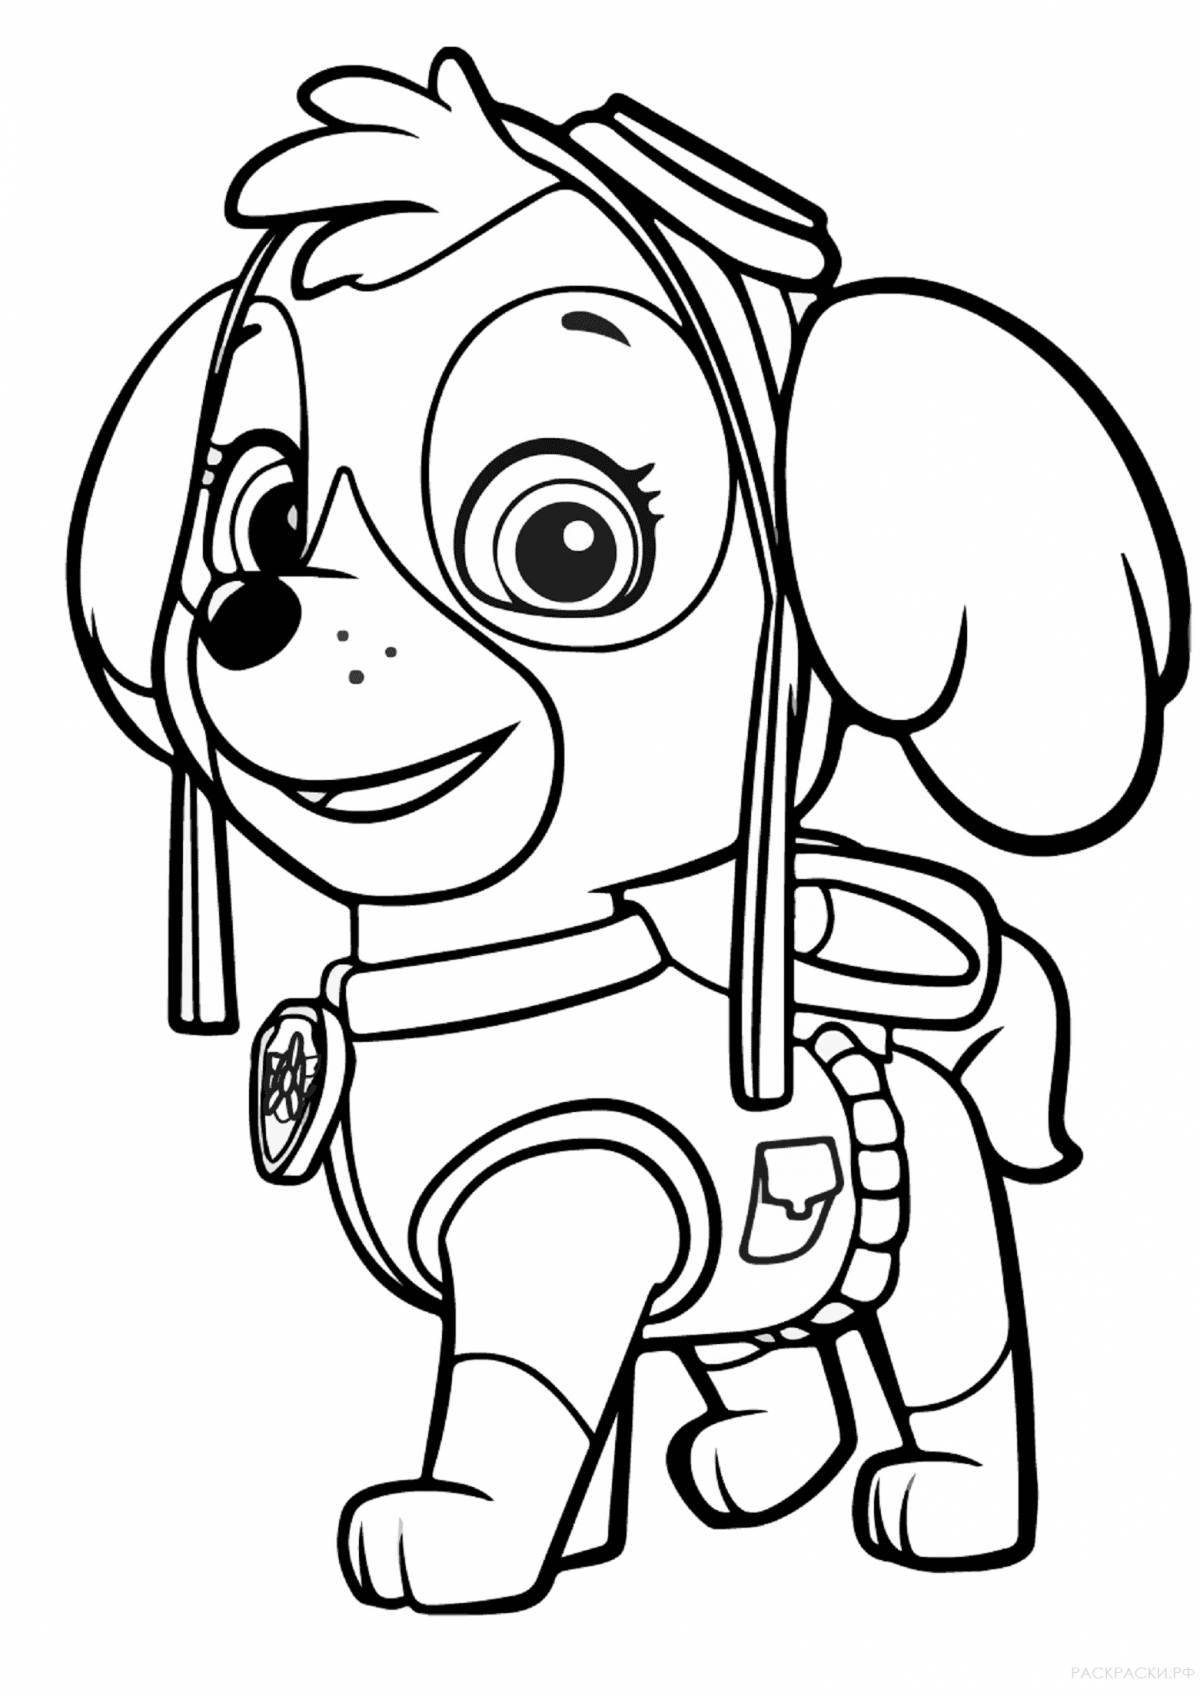 Puppy Patrol Outline Coloring Page